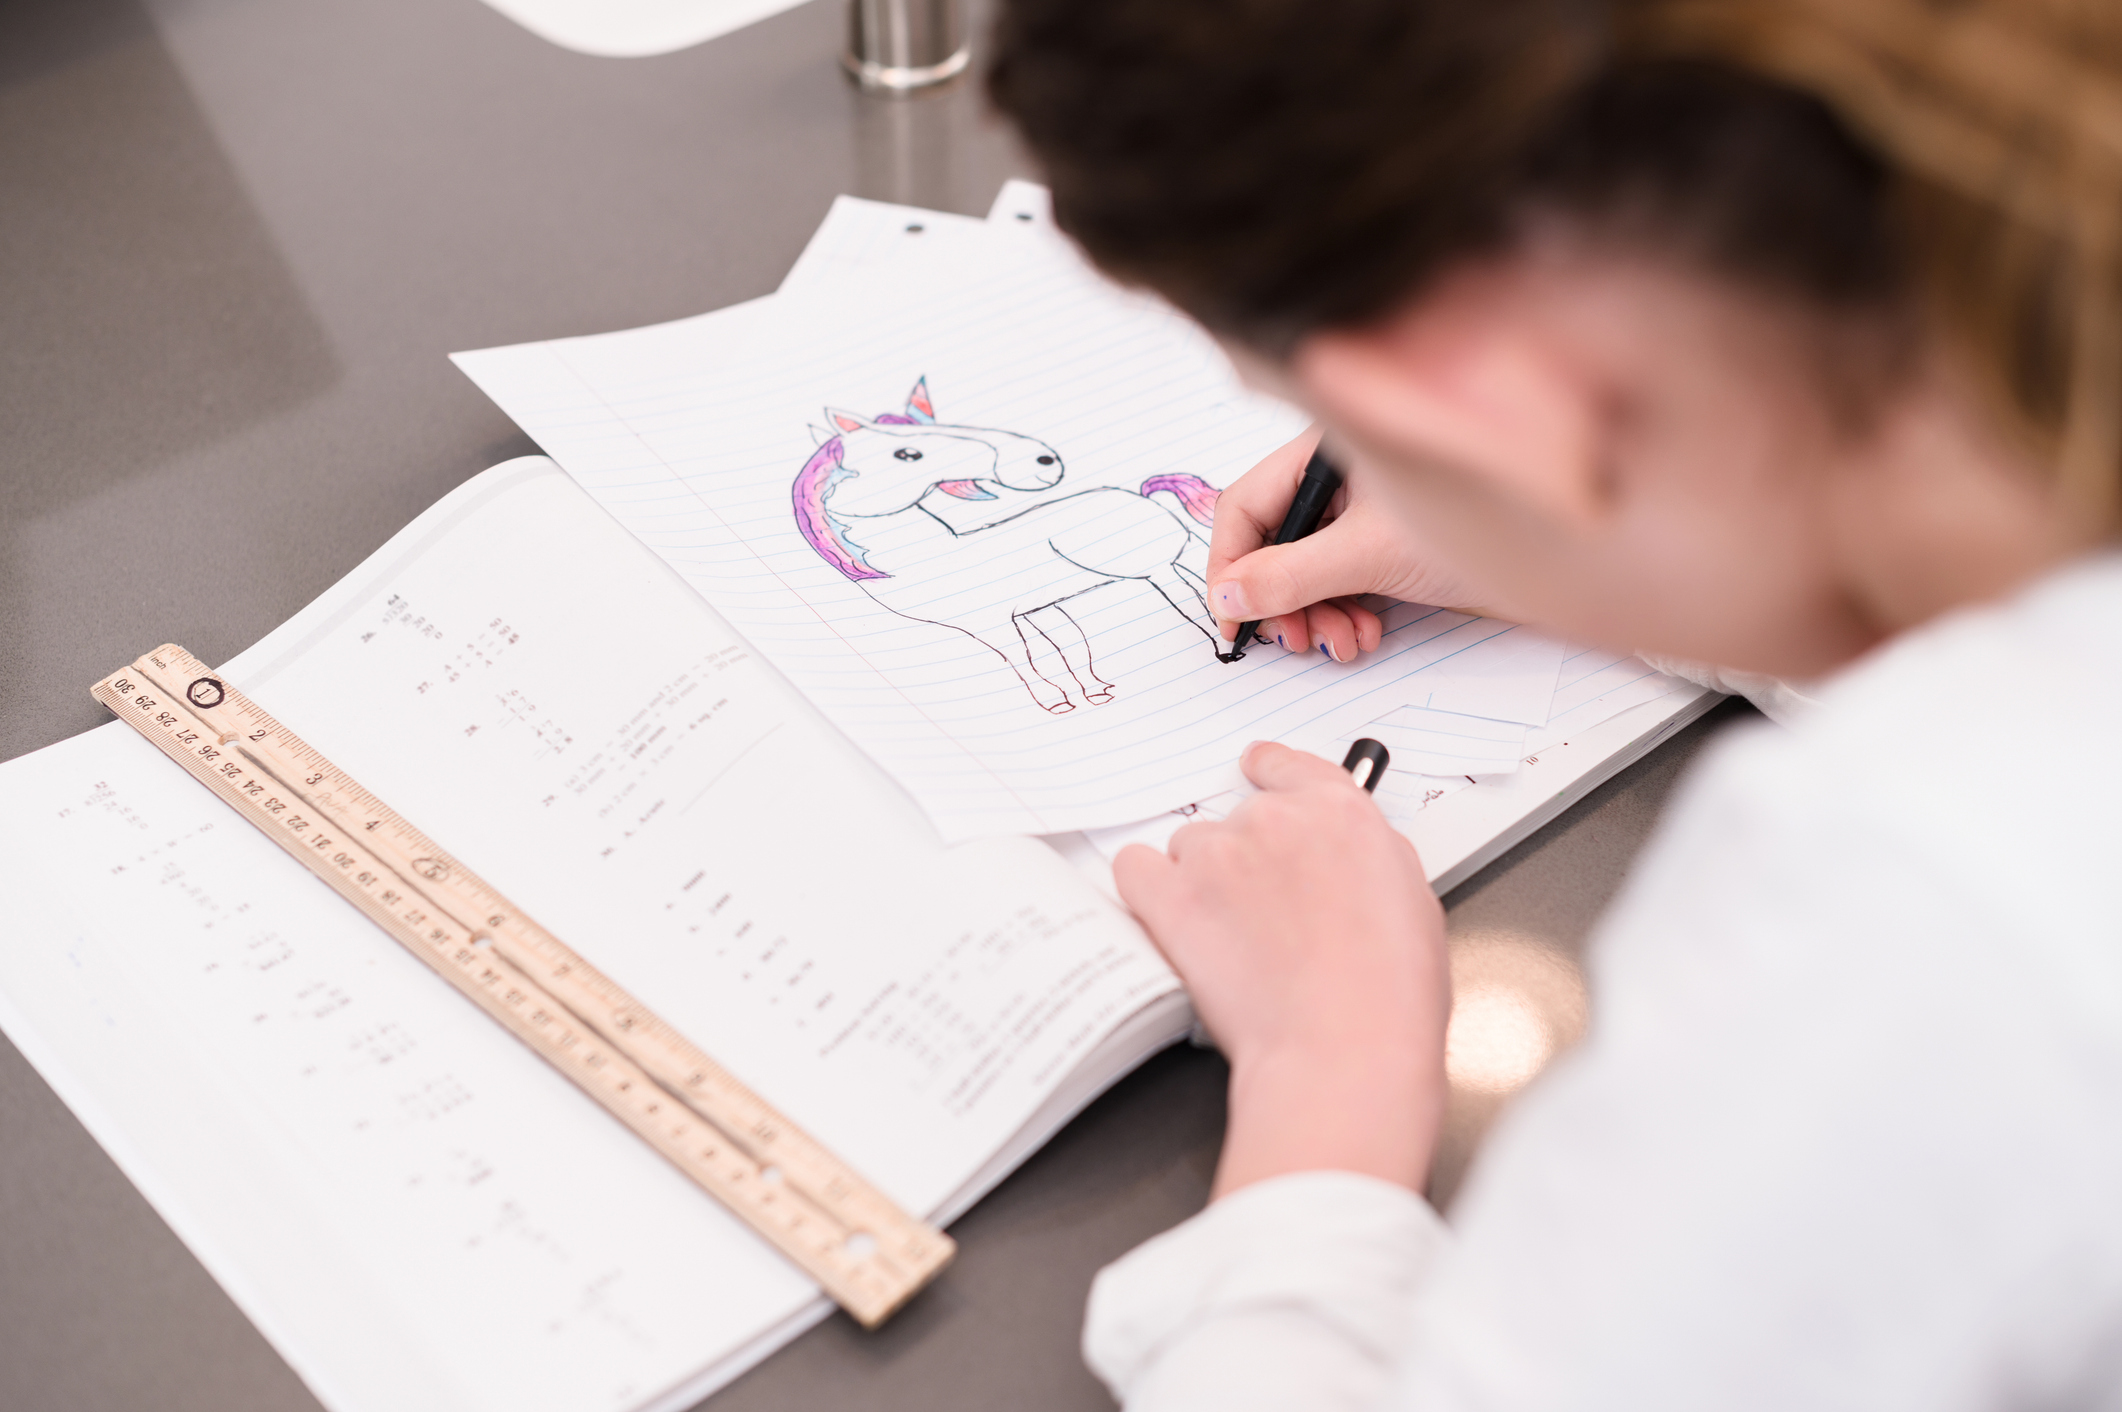 A young girl drawing a unicorn on a paper